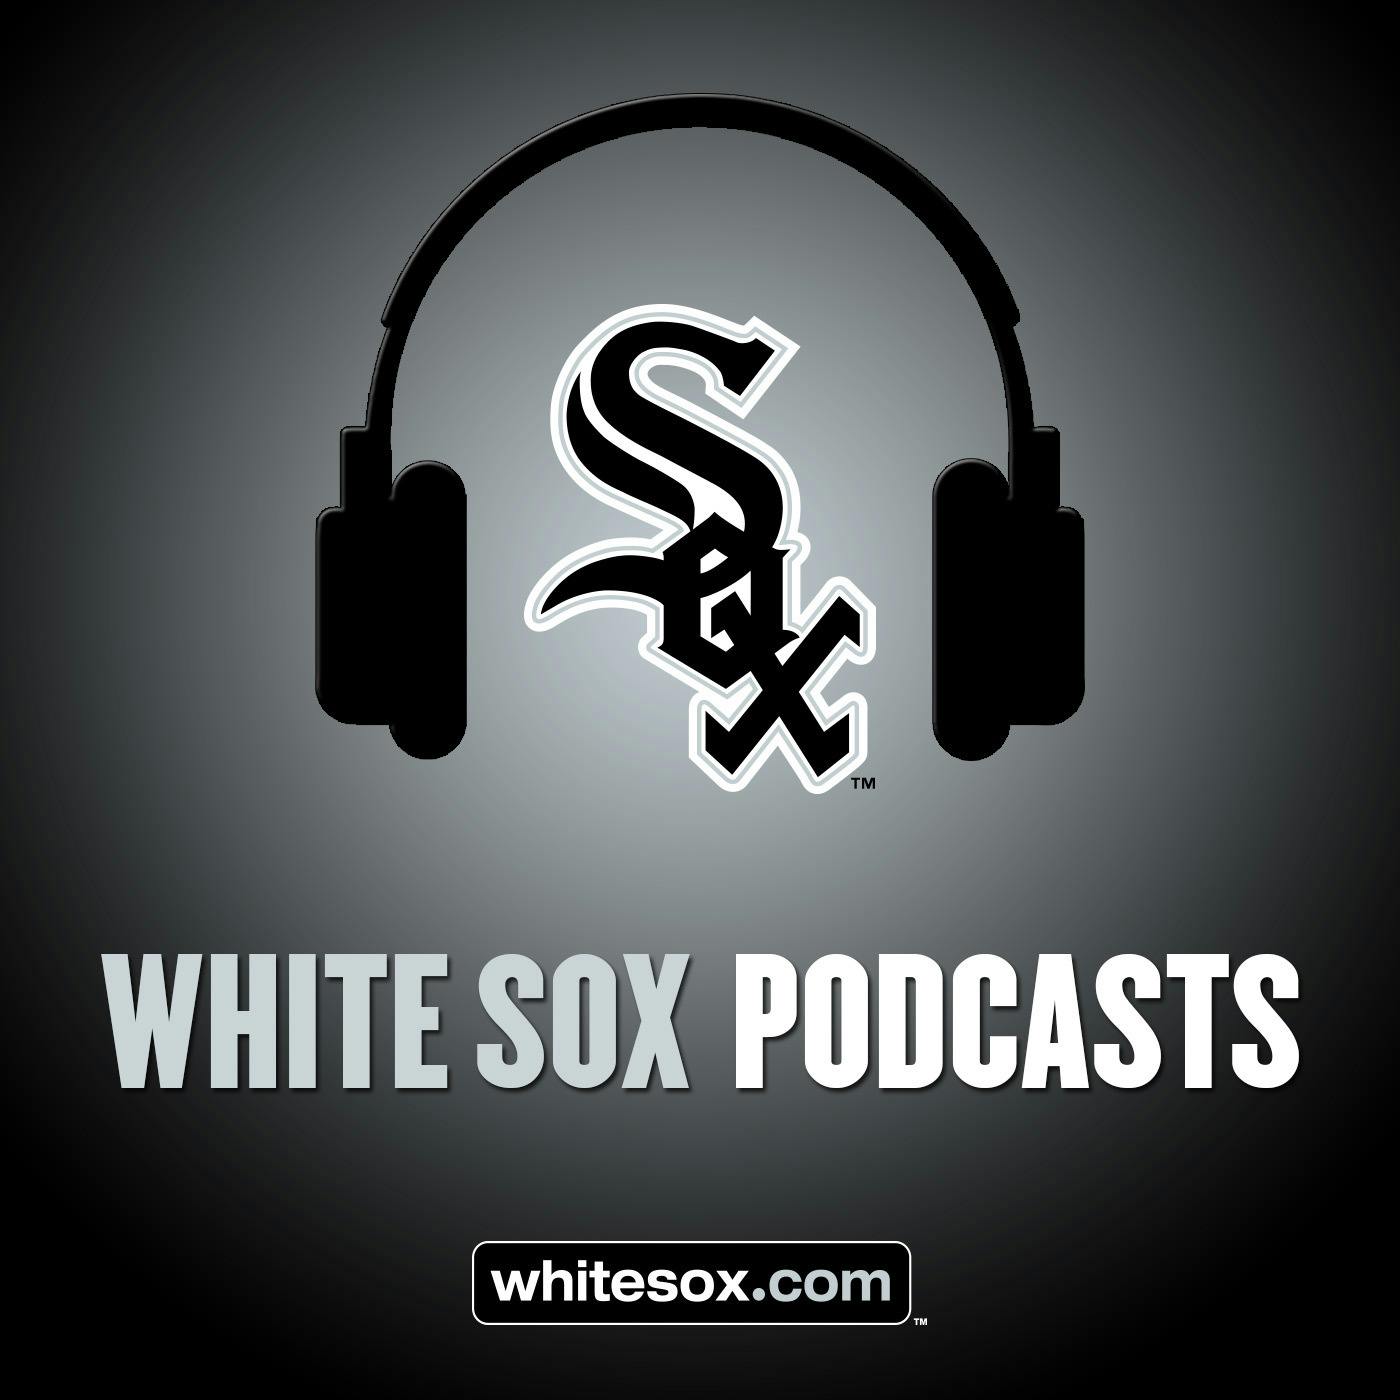 11/12/17: White Sox Weekly